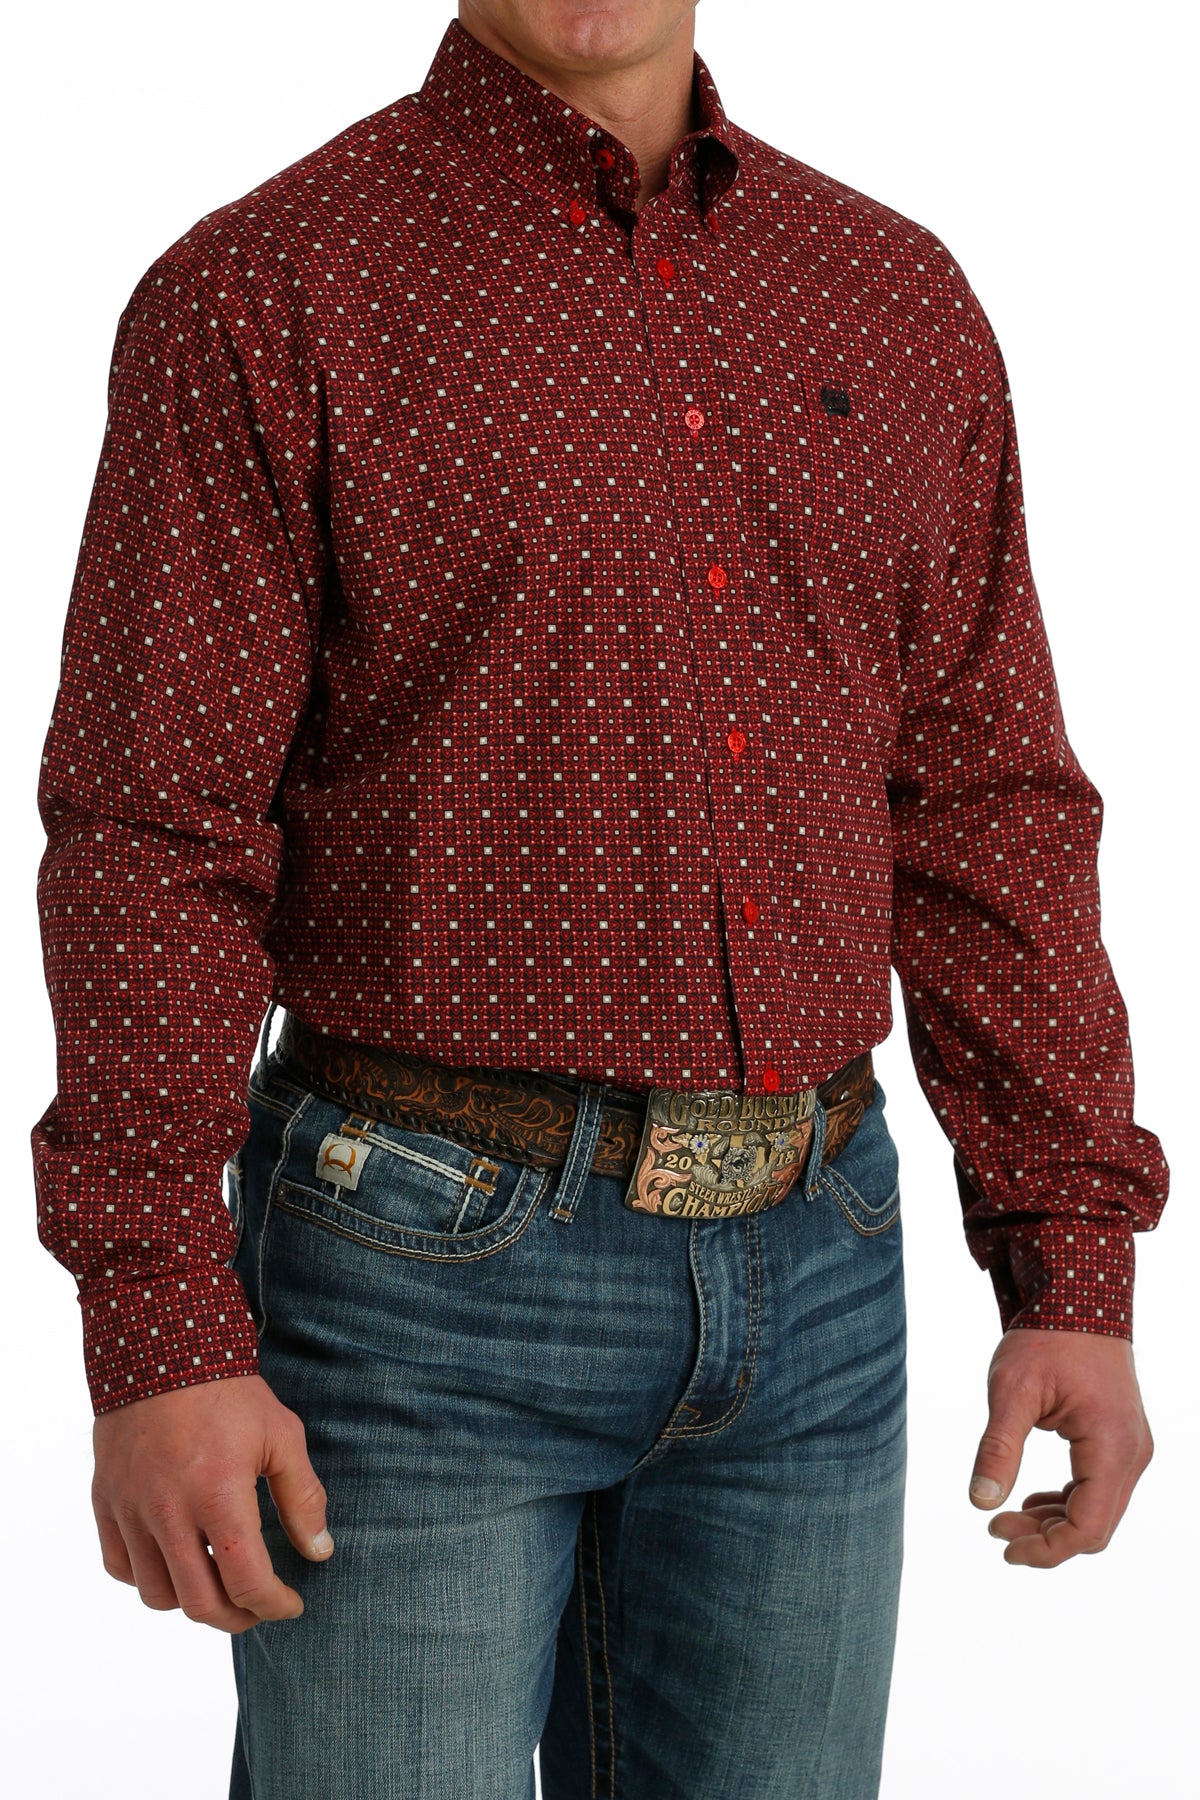 'Cinch' Men's Geo Print Classic Fit Button Down - Red